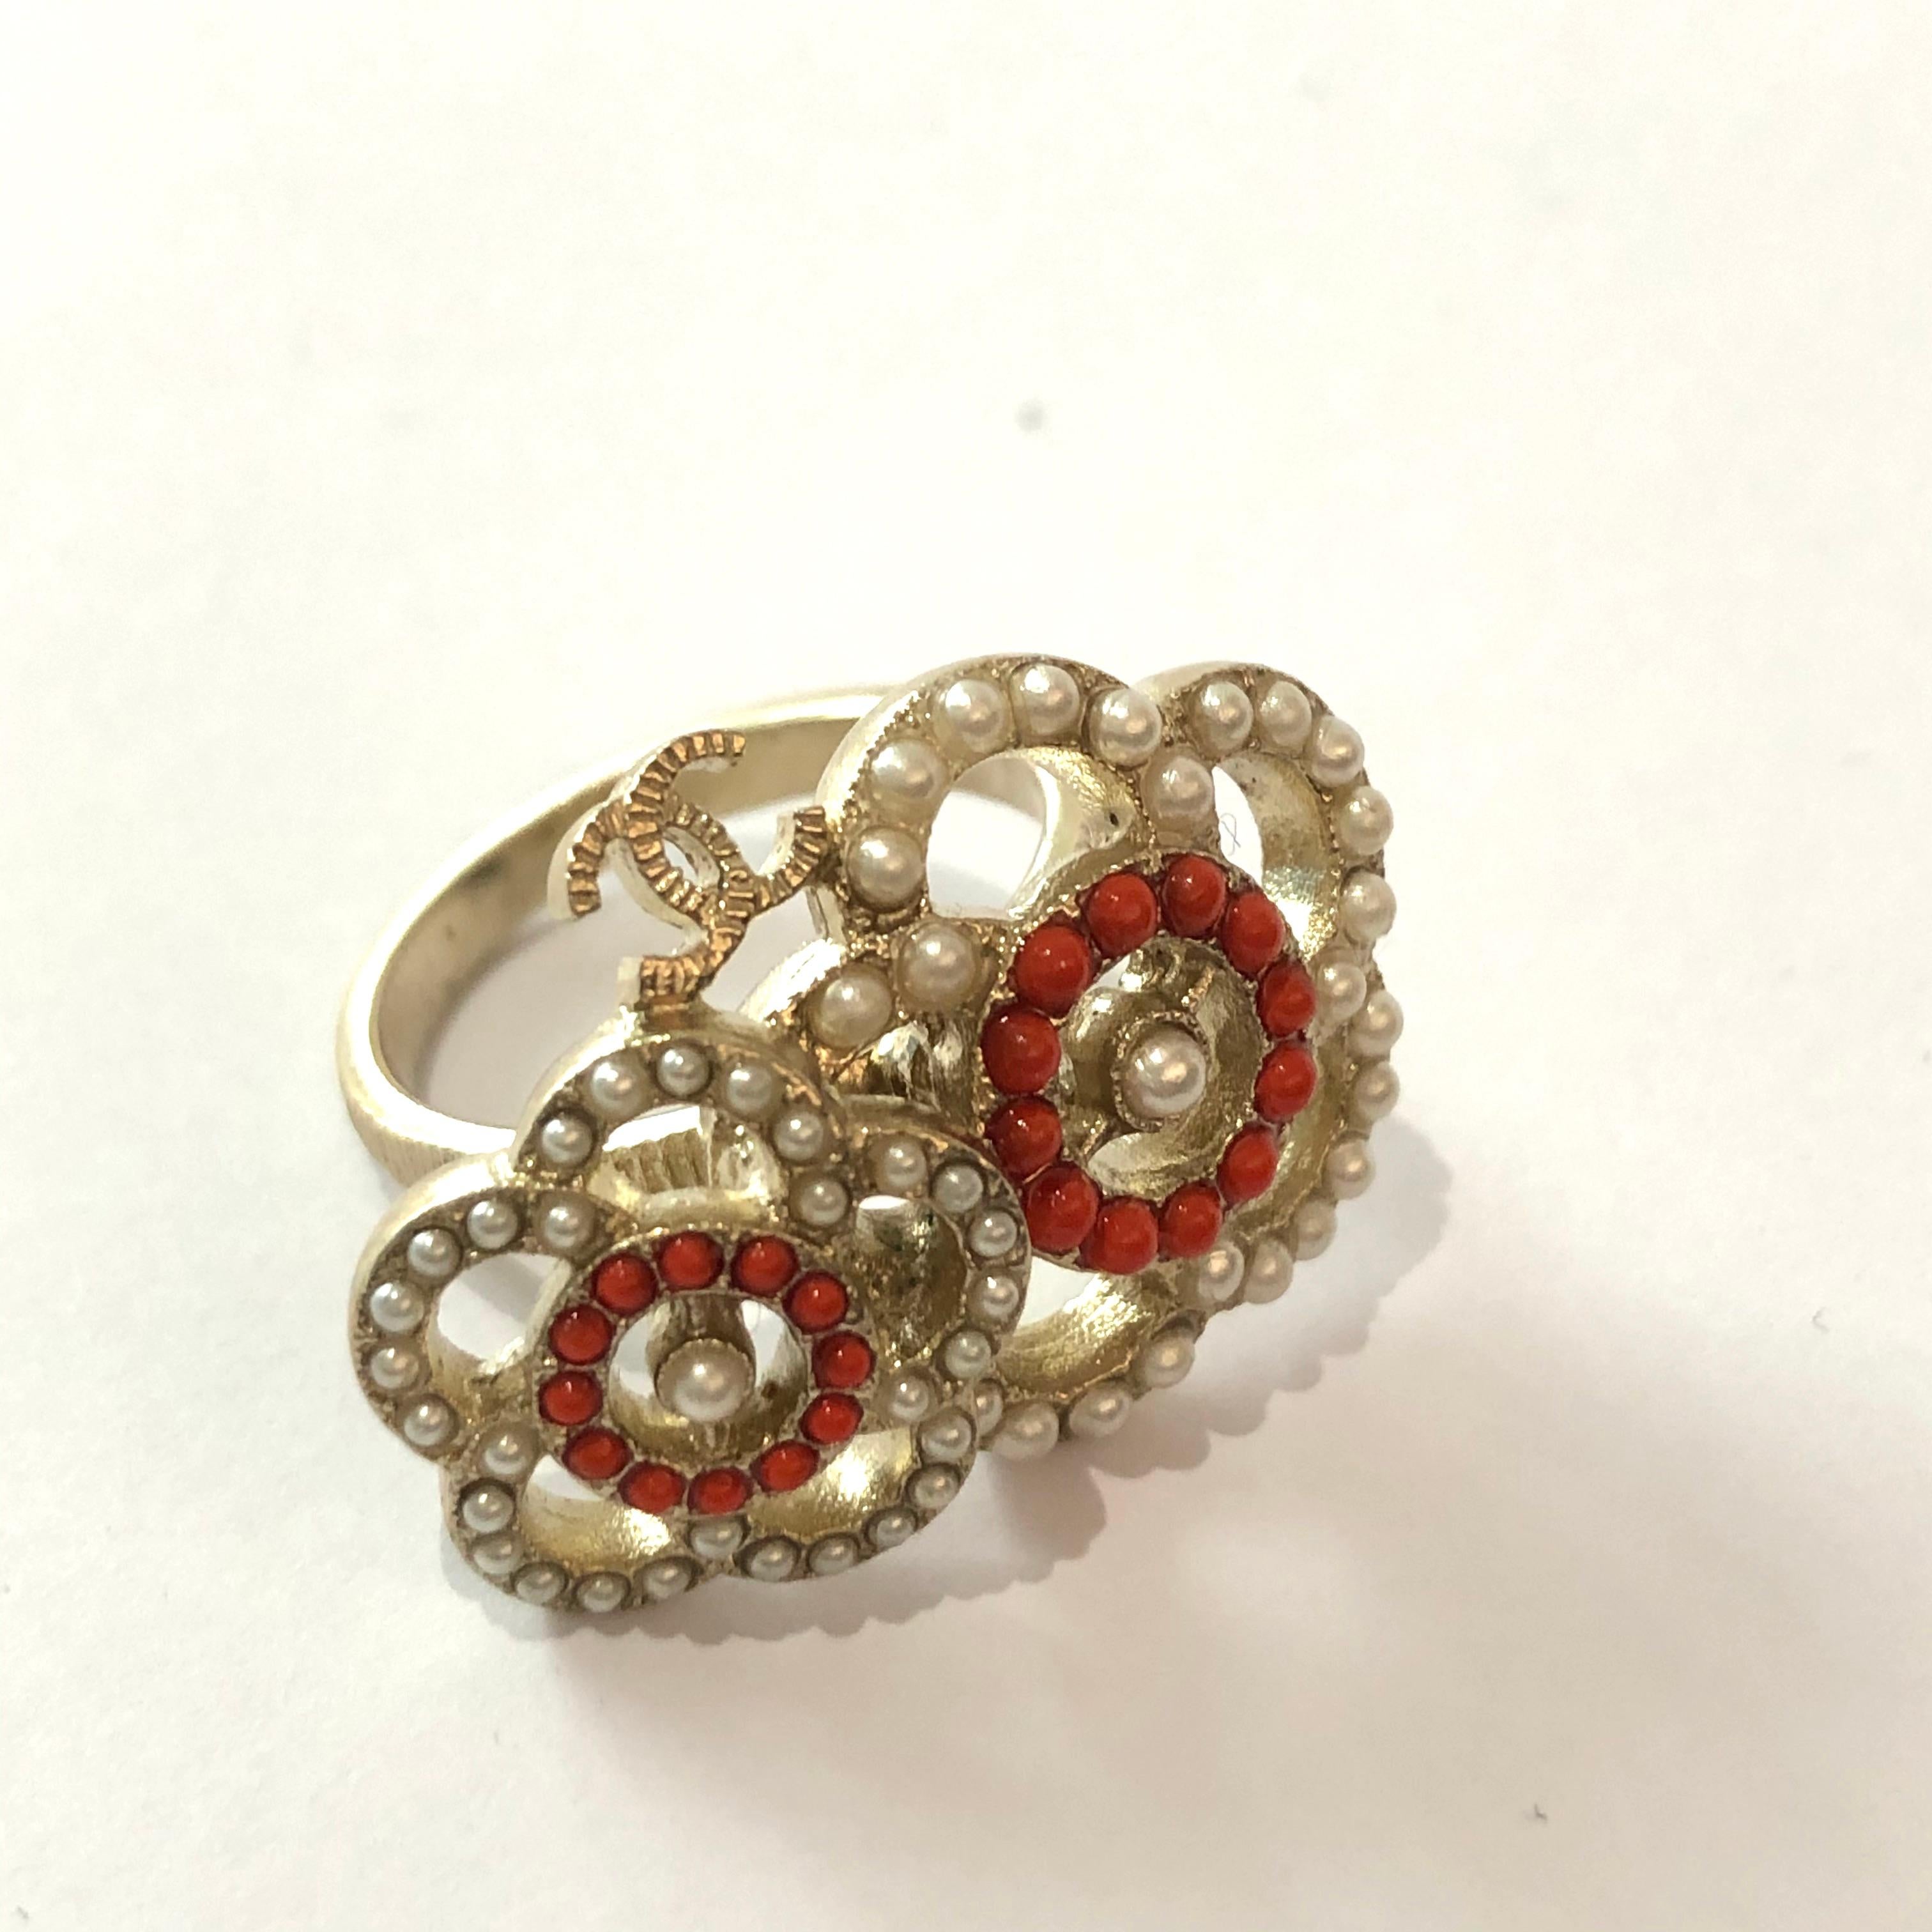 Women's Chanel Camelia and CC Ring With Pearls